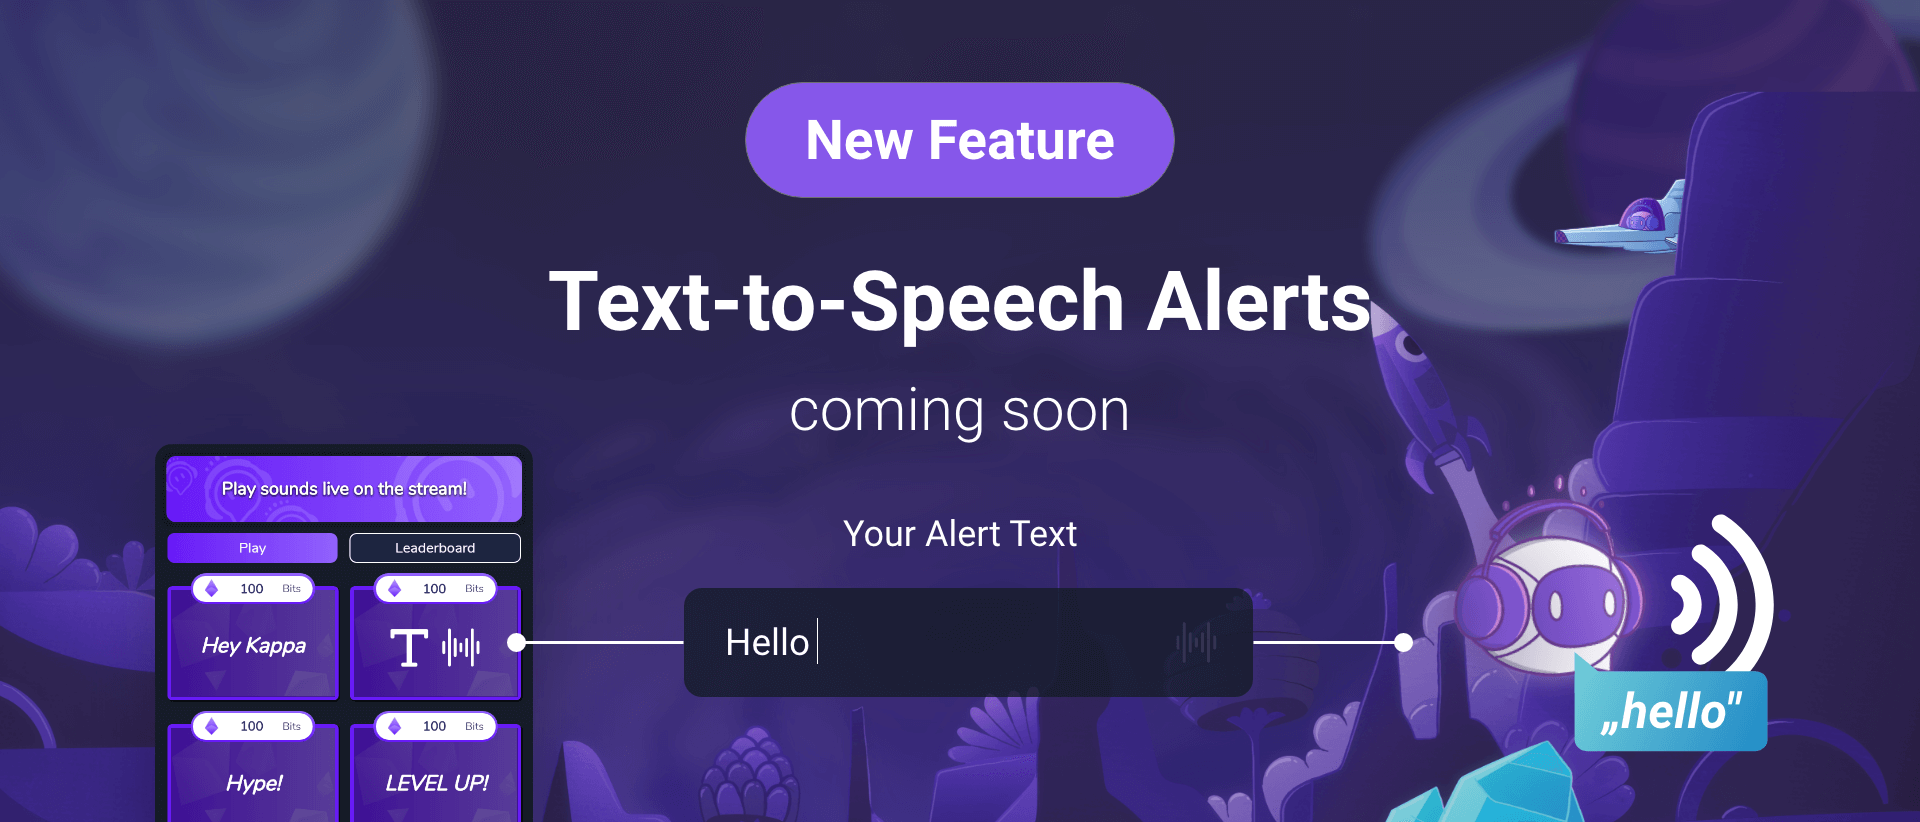 This graphic displays the fact that we will be adding text-to-speech alerts within one of the upcoming updates.